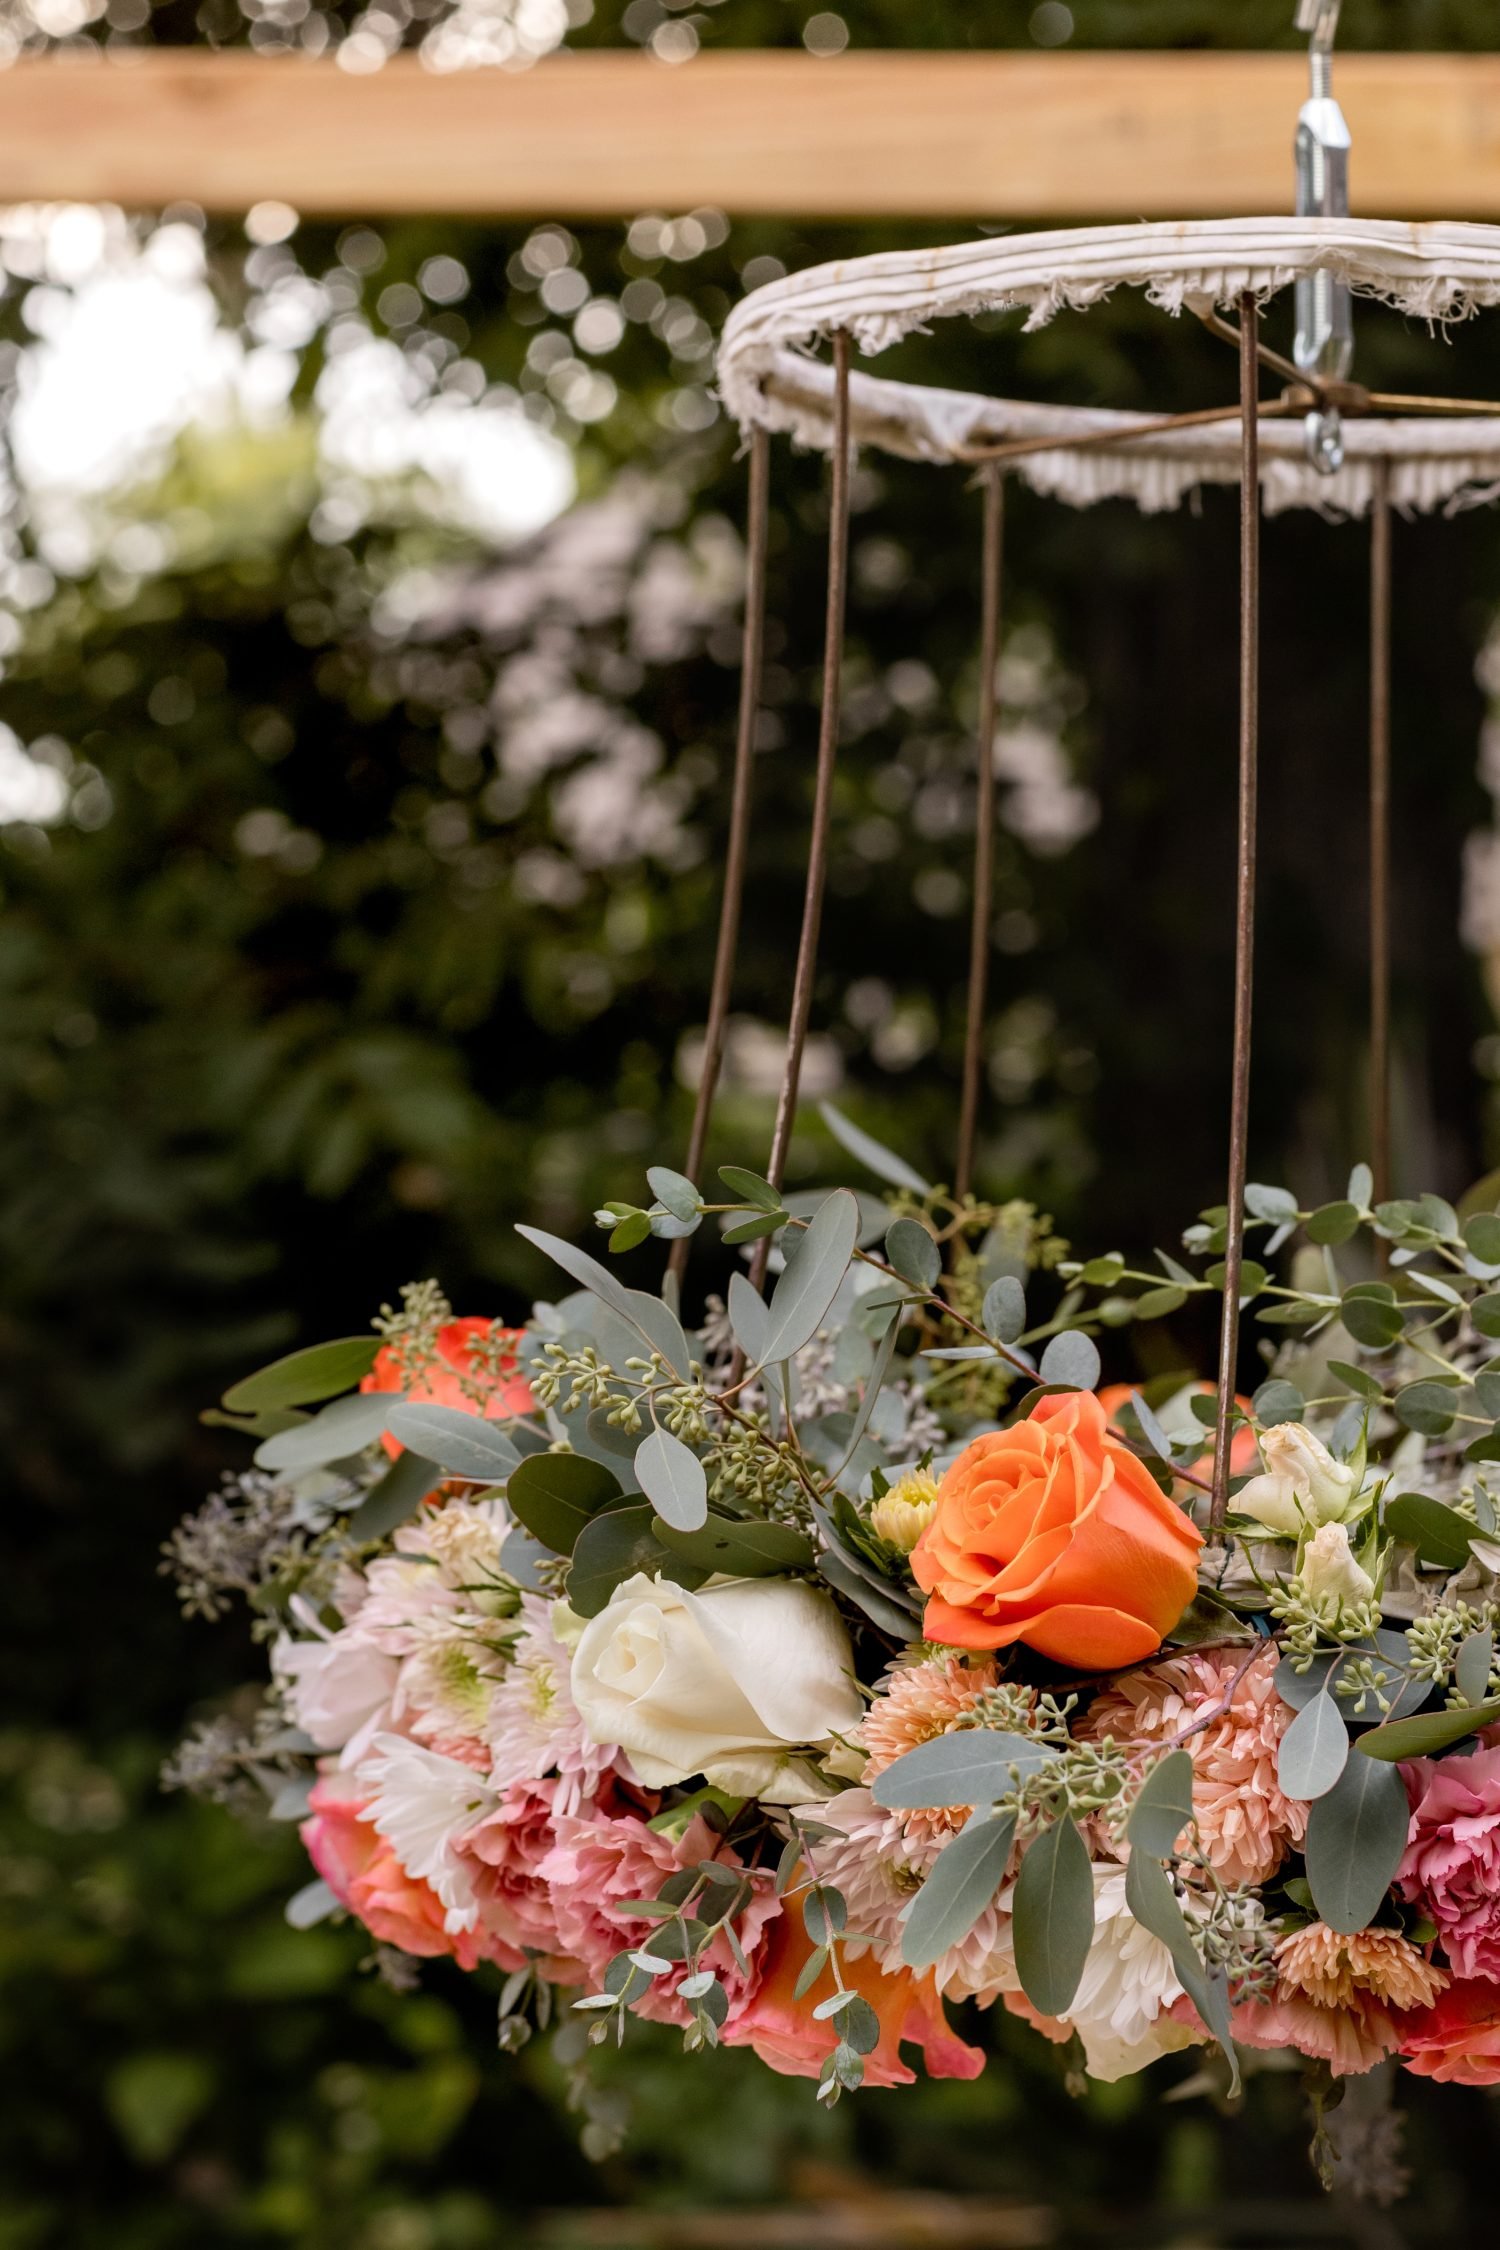 A handmade flower crown made from a vintage lampshade, oasis, and fresh flowers hanging on top of a magical table set for 40 guests.